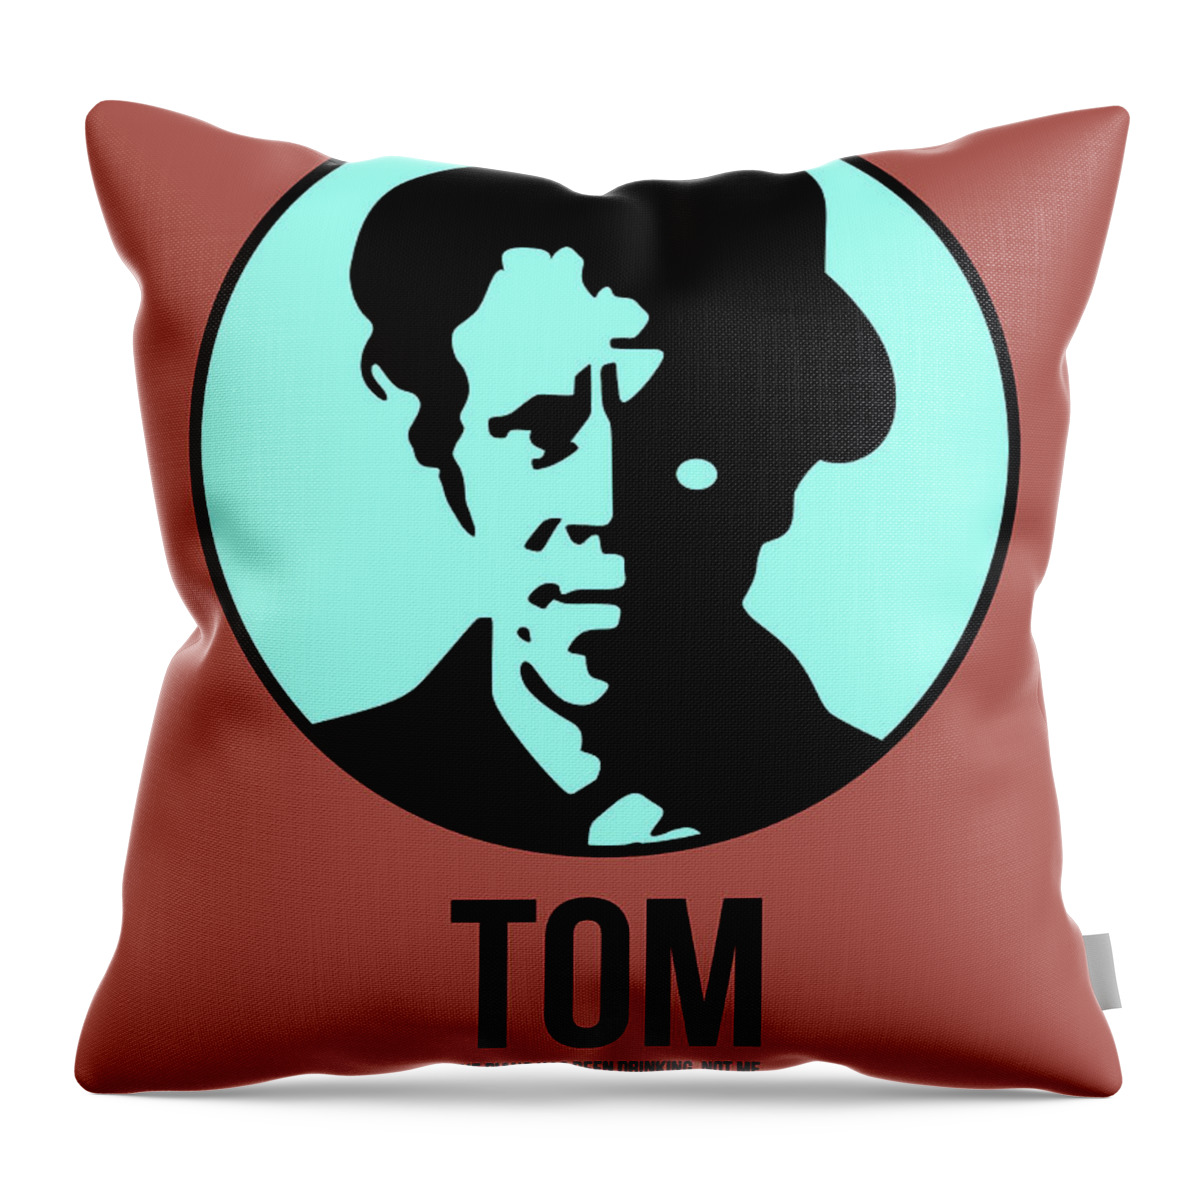 Music Throw Pillow featuring the digital art Tom Poster 2 by Naxart Studio